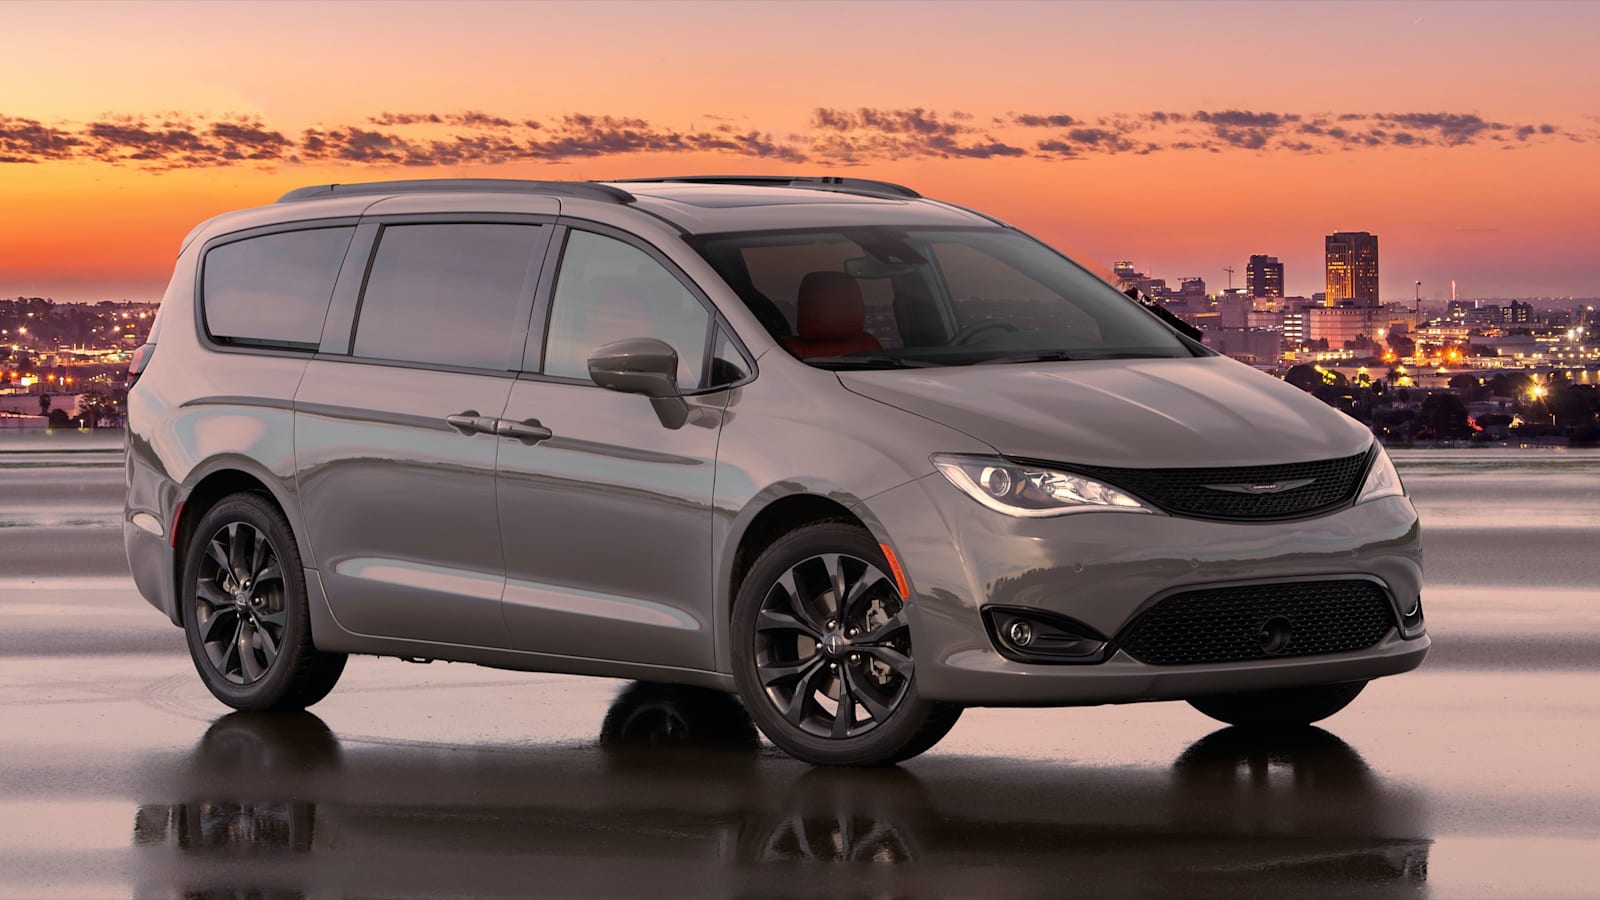 2020 Chrysler Pacifica Review | Hybrid, price, specs, features and photos -  Autoblog